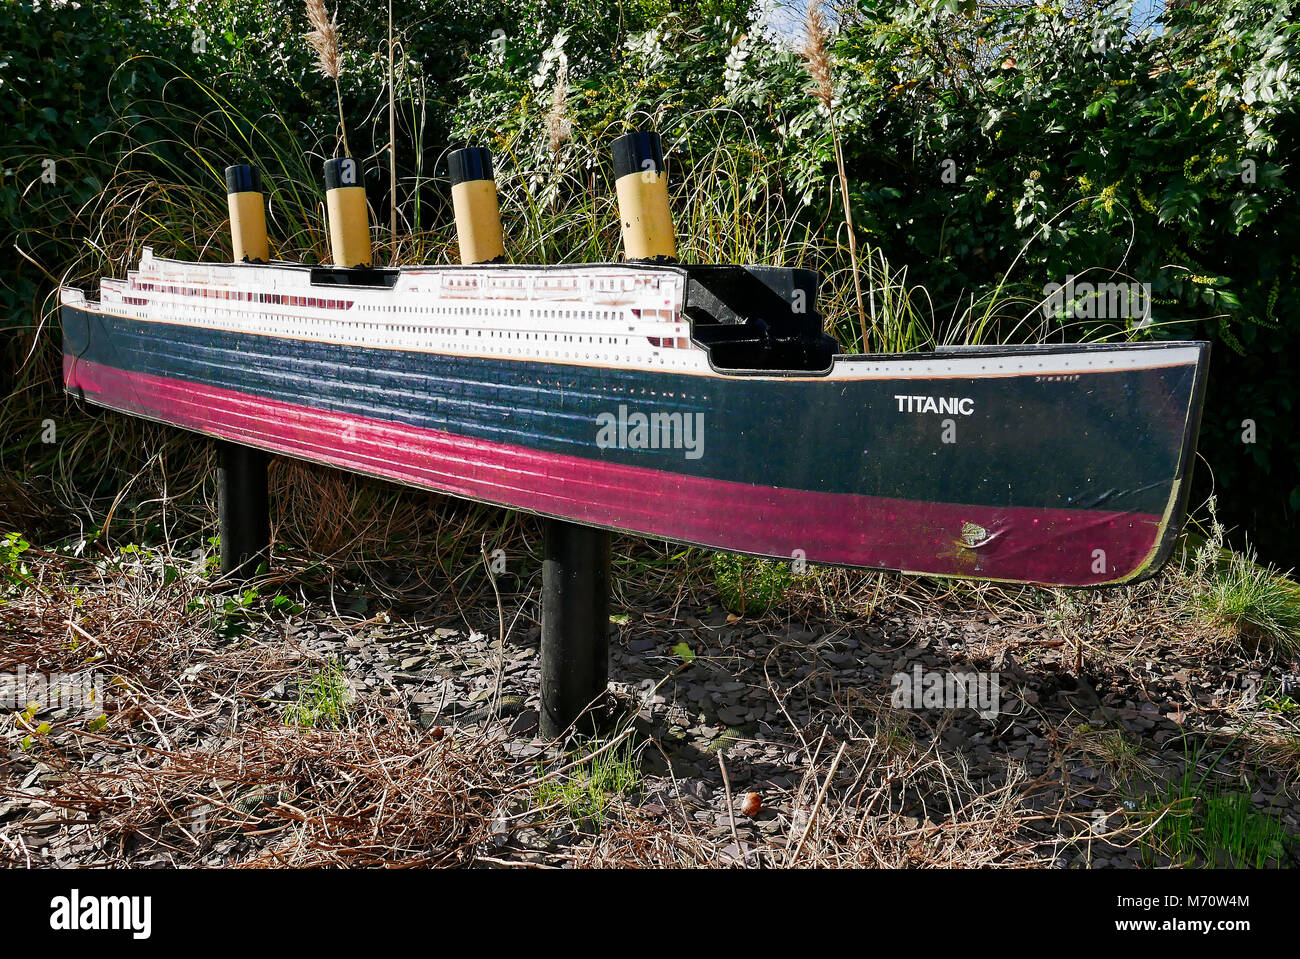 Model of the Titanic in the grounds of the Wallace Hartley memorial in Colne,Lancashire,UK Stock Photo